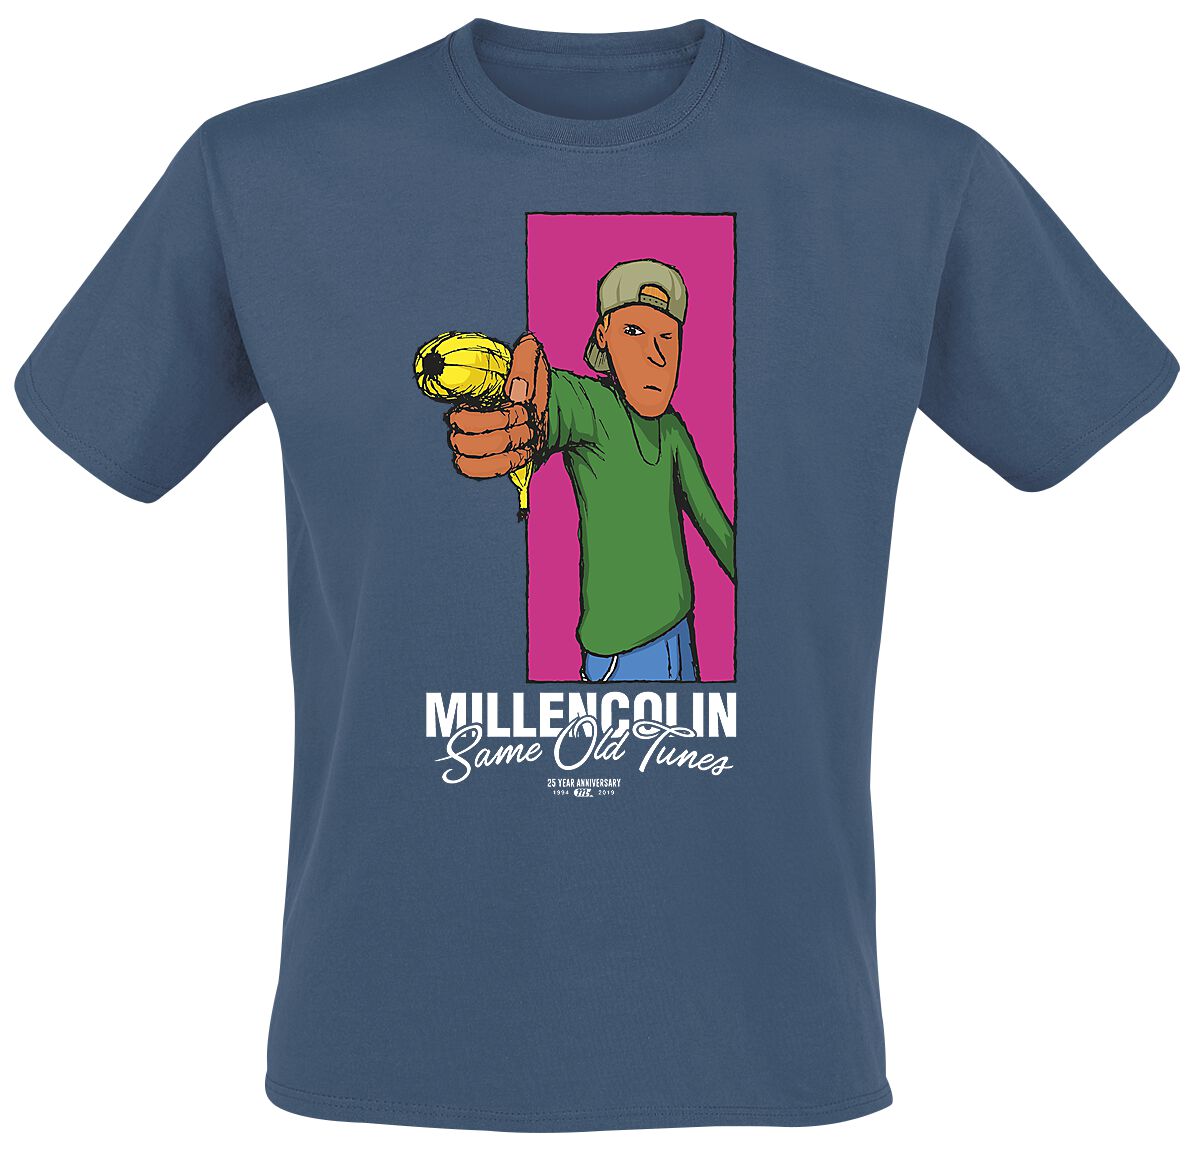 Millencolin Same Old Tunes T-Shirt blue